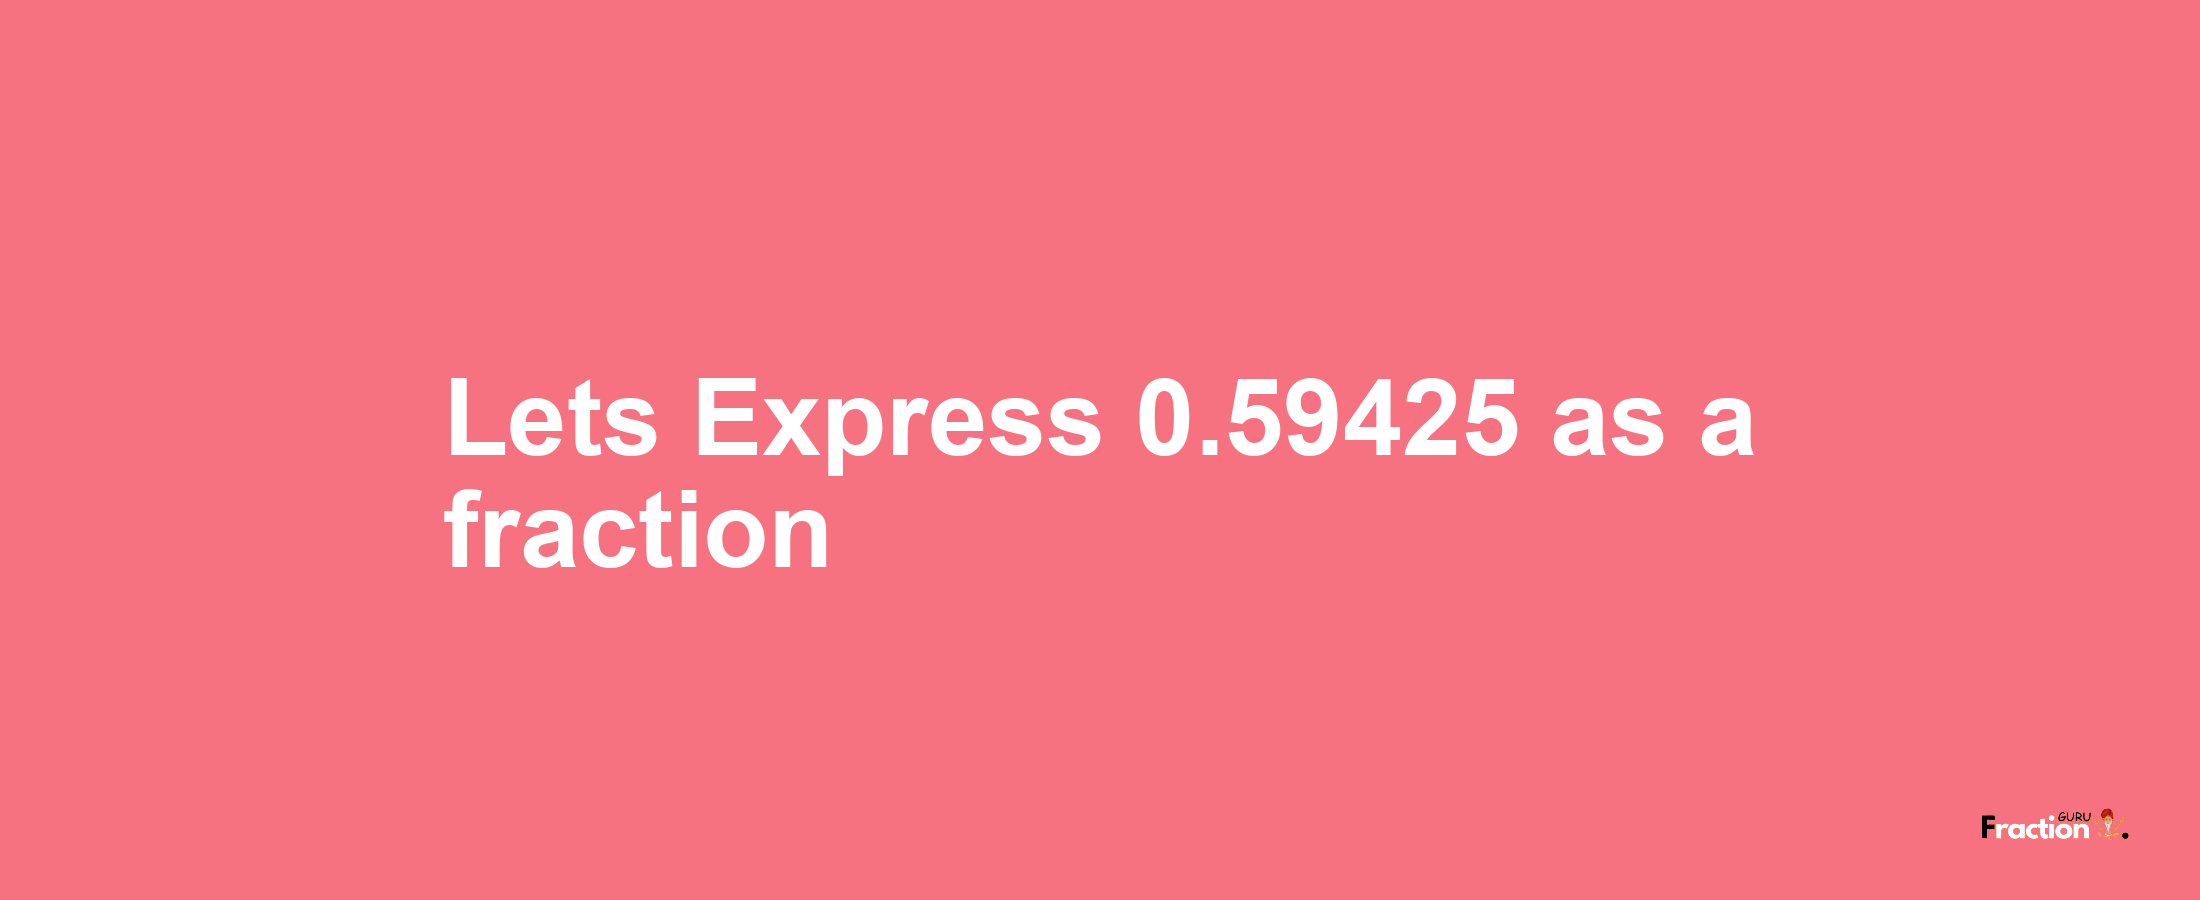 Lets Express 0.59425 as afraction